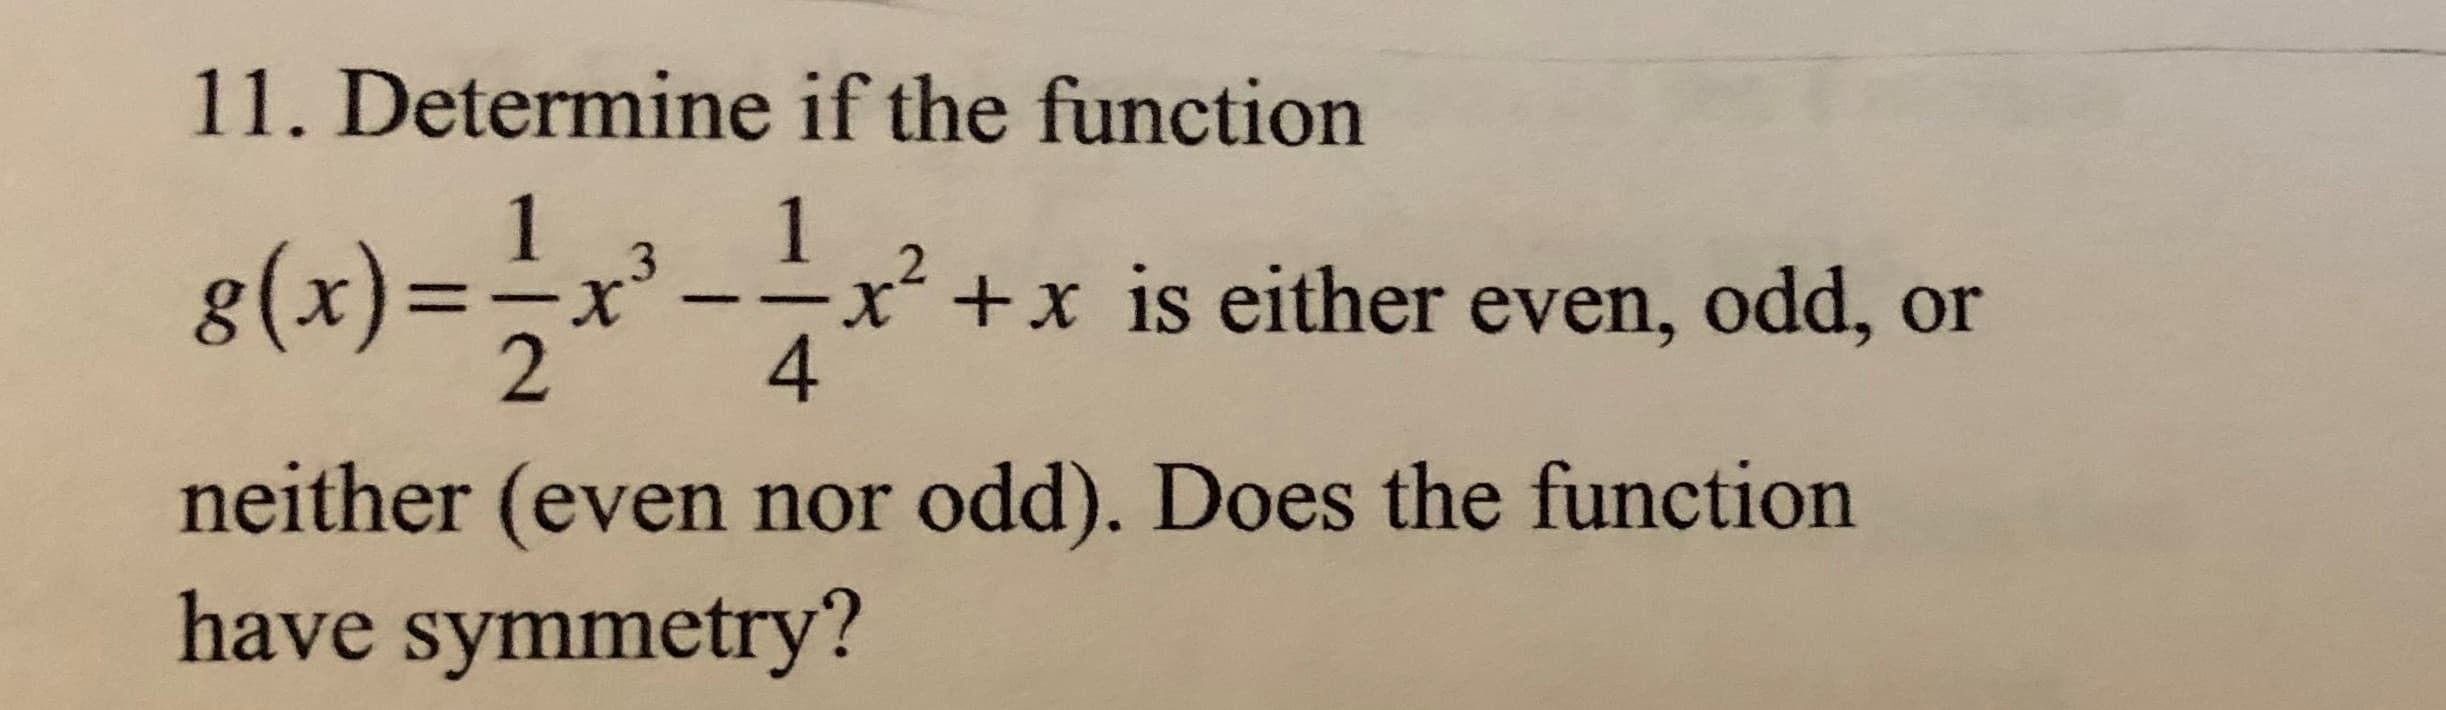 11. Determine if the function
8(x)=,*
1
1
x²+x is either even, odd, or
4.
neither (even nor odd). Does the function
have symmetry?
